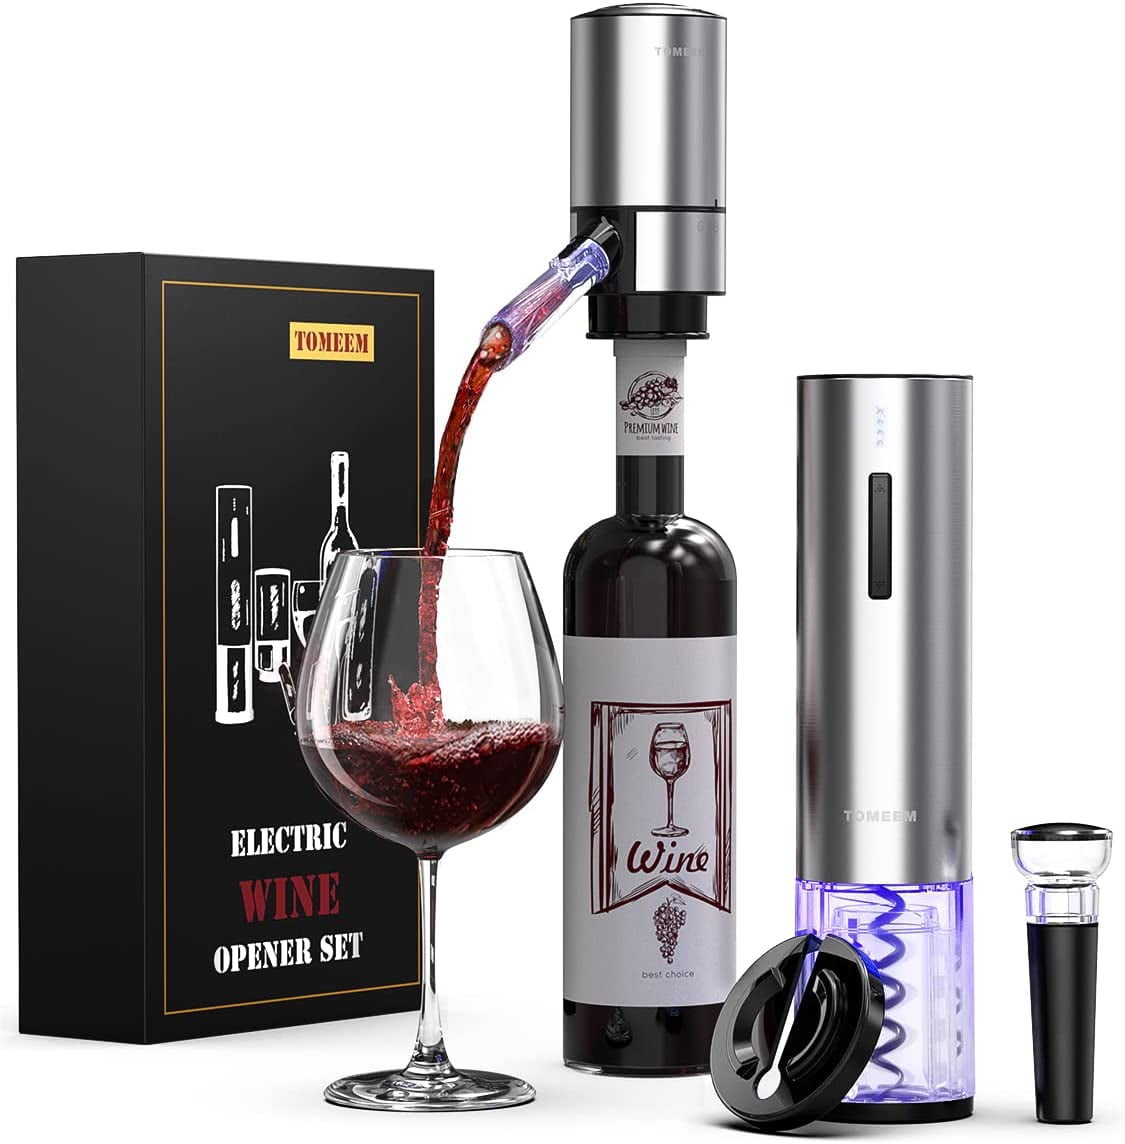 4-in-1 Automatic Electric Wine Bottle Opener Set, Premium Corkscrew with Foil Cutter, Vacuum Wine Stopper for Easy Carry Reusable Convenience Opener